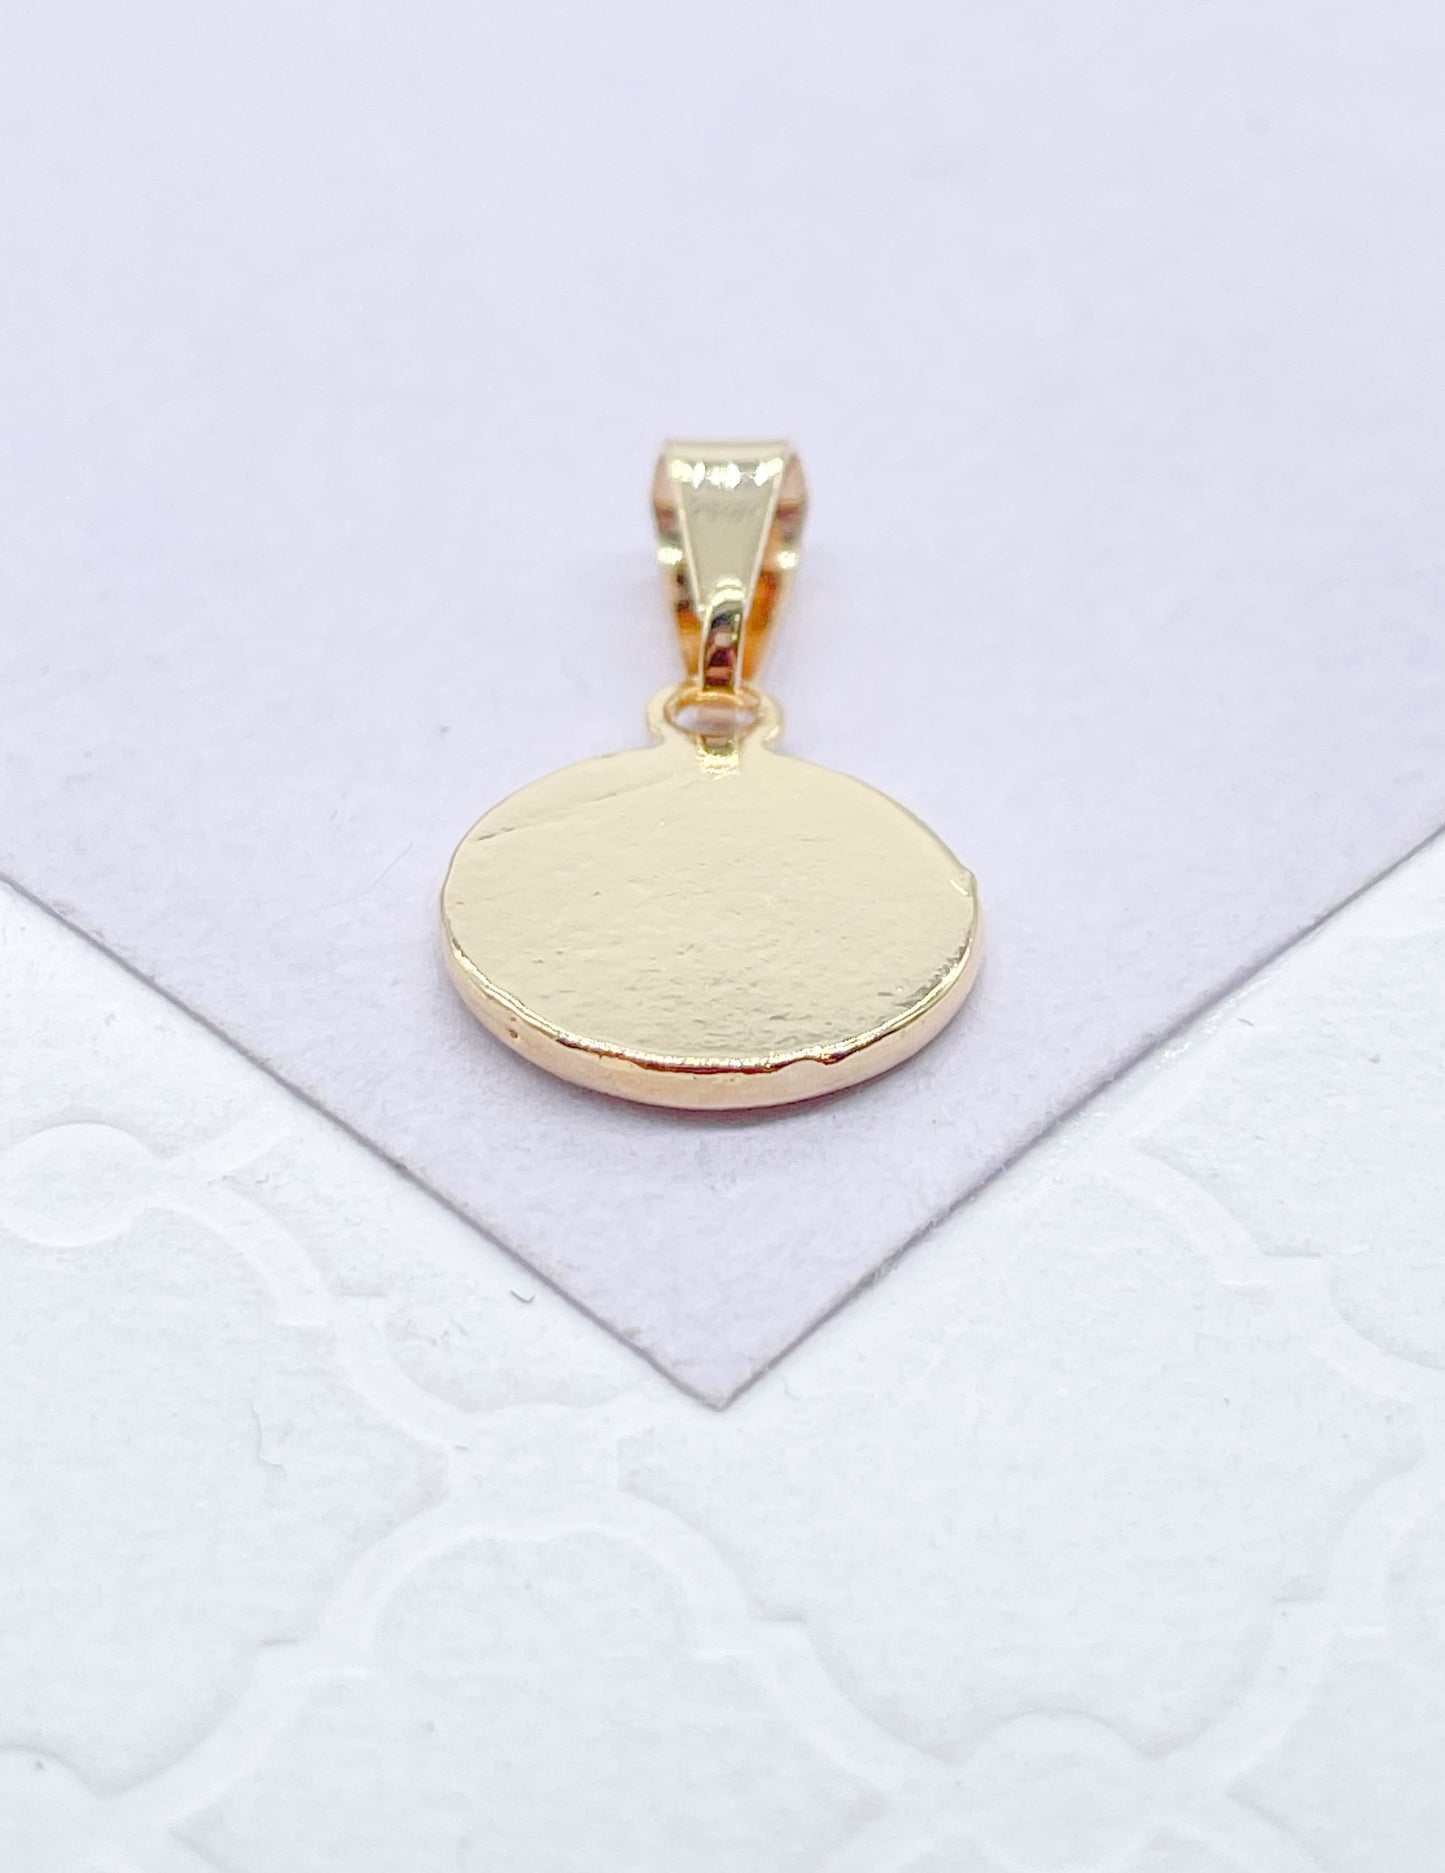 18k Gold Filled Mini Medallion Charm Pendant With engraved Angel